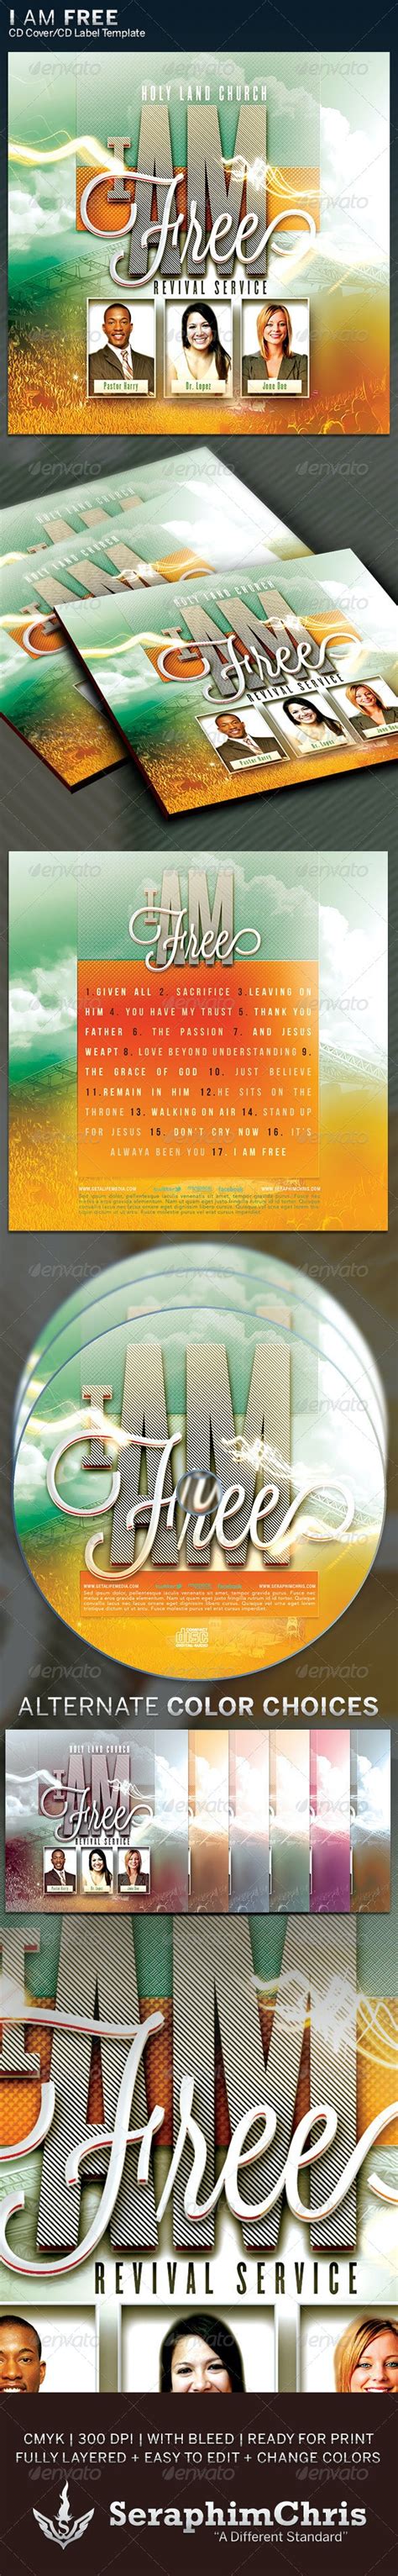 I Am Free Cd Cover Artwork Template By Seraphimchris Graphicriver